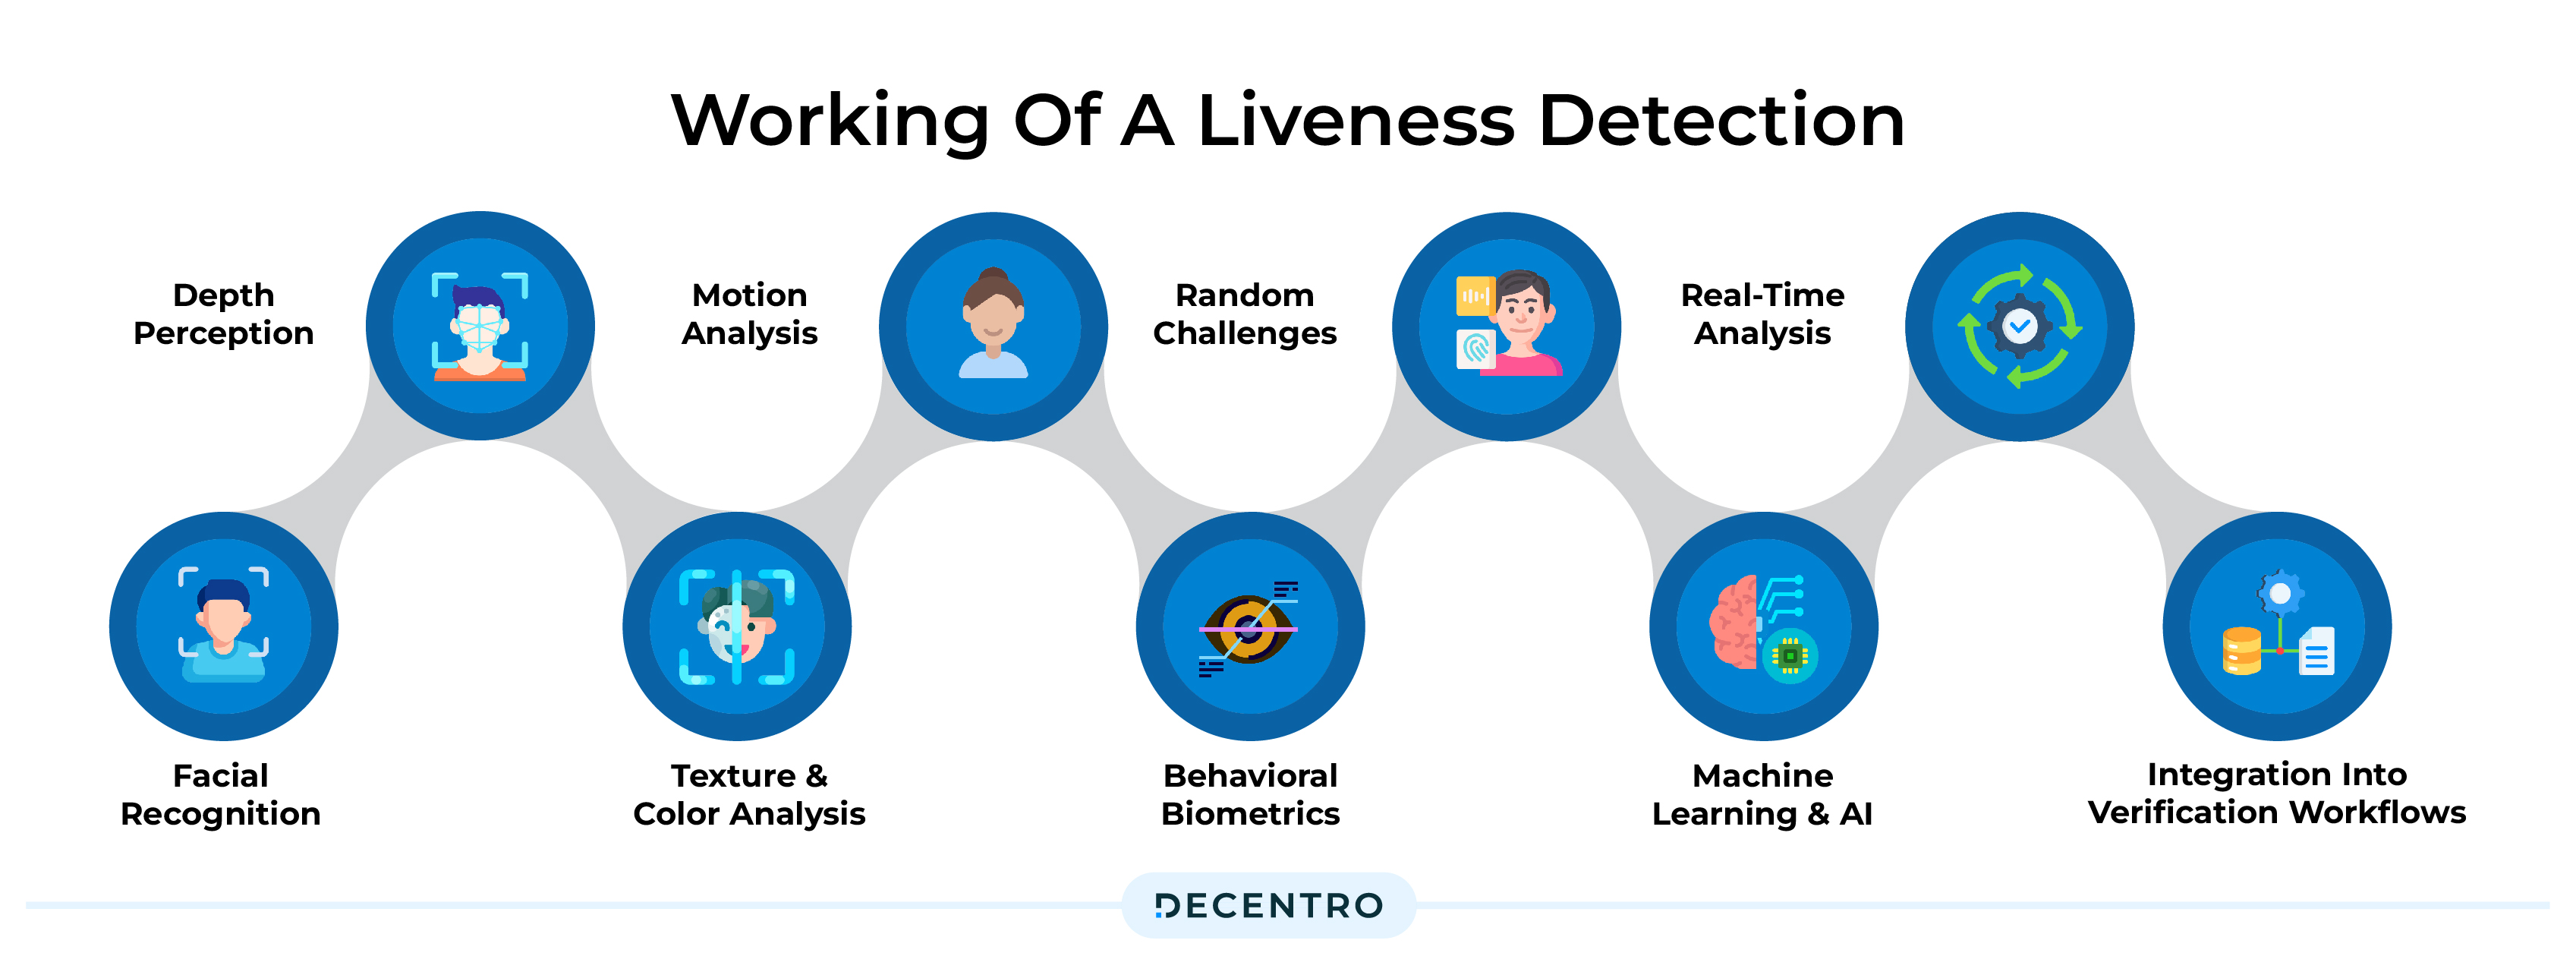 Workings of a Liveness Detection 